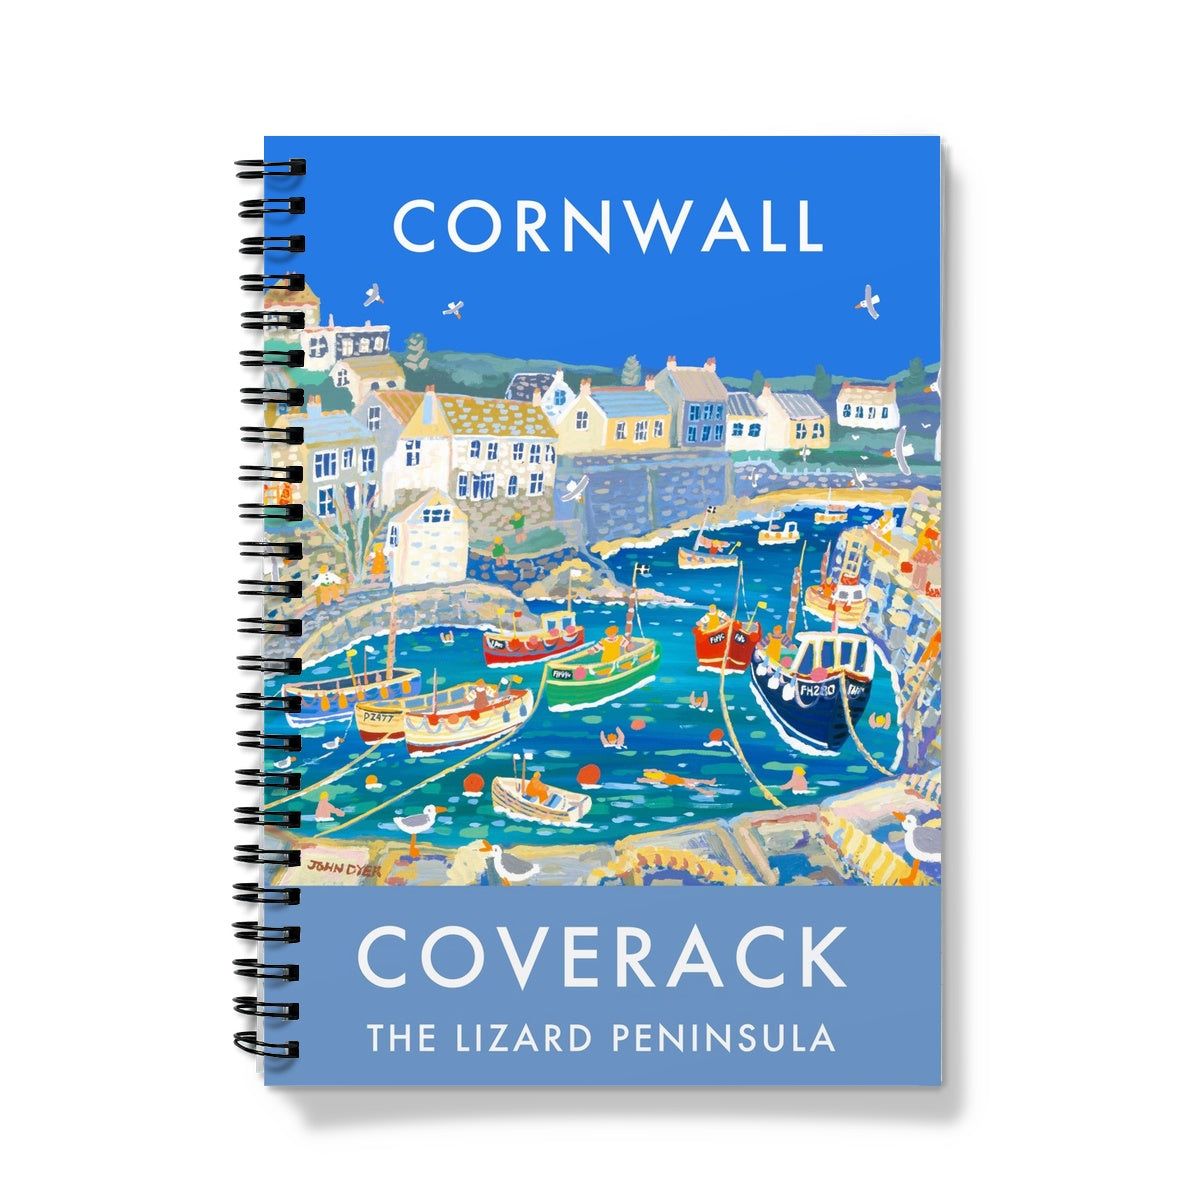 Coverack Harbour Cornwall. Cornish Contemporary Art Notebook by John Dyer